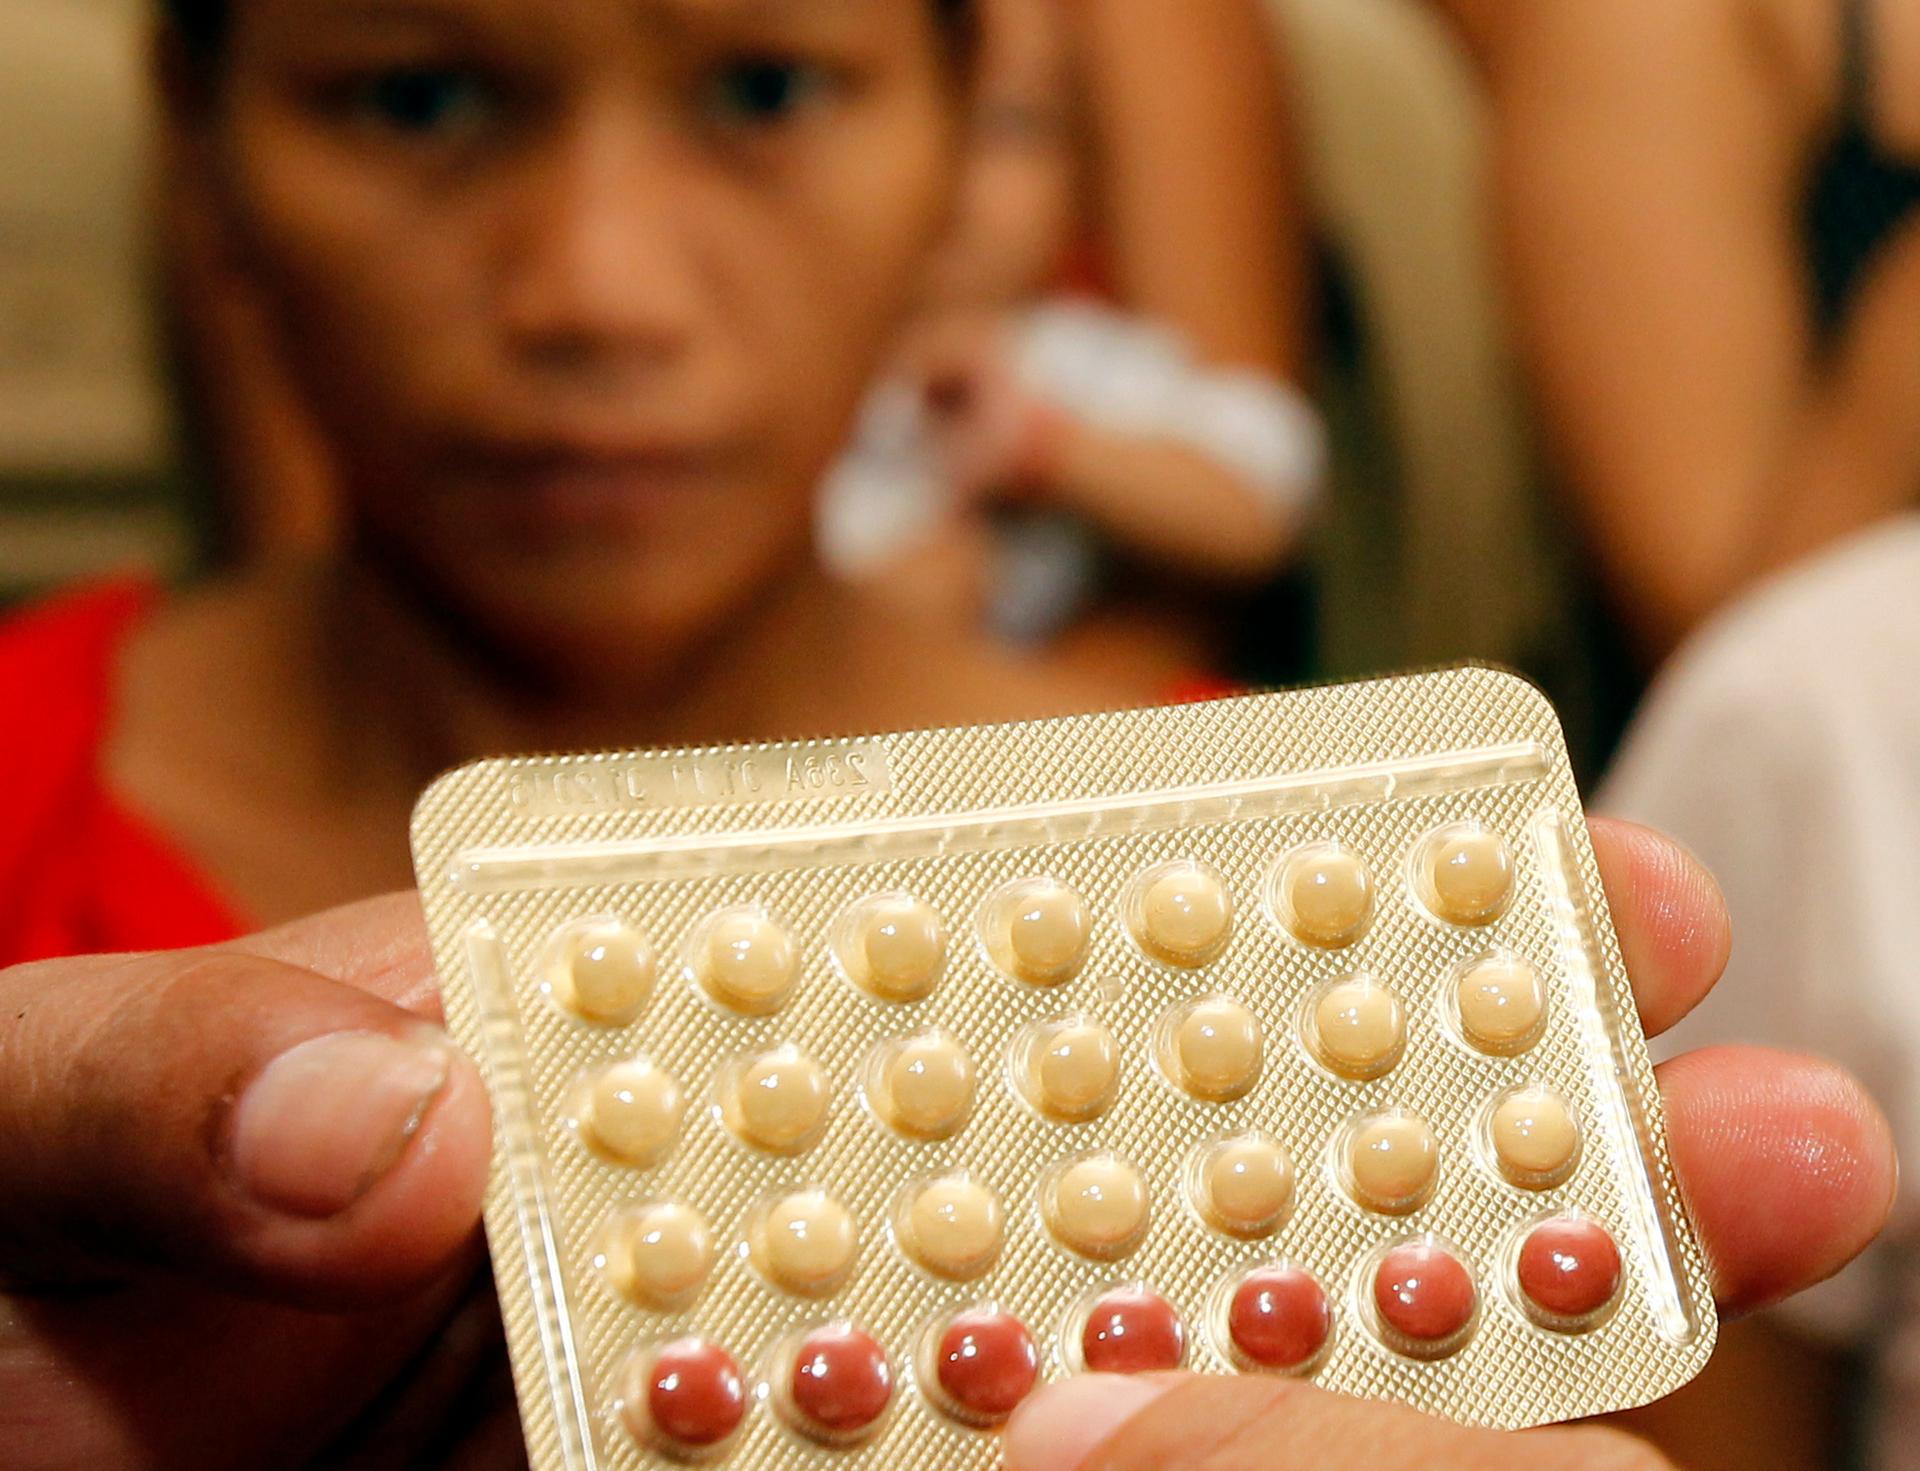 An NGO health worker holds contraceptive pills